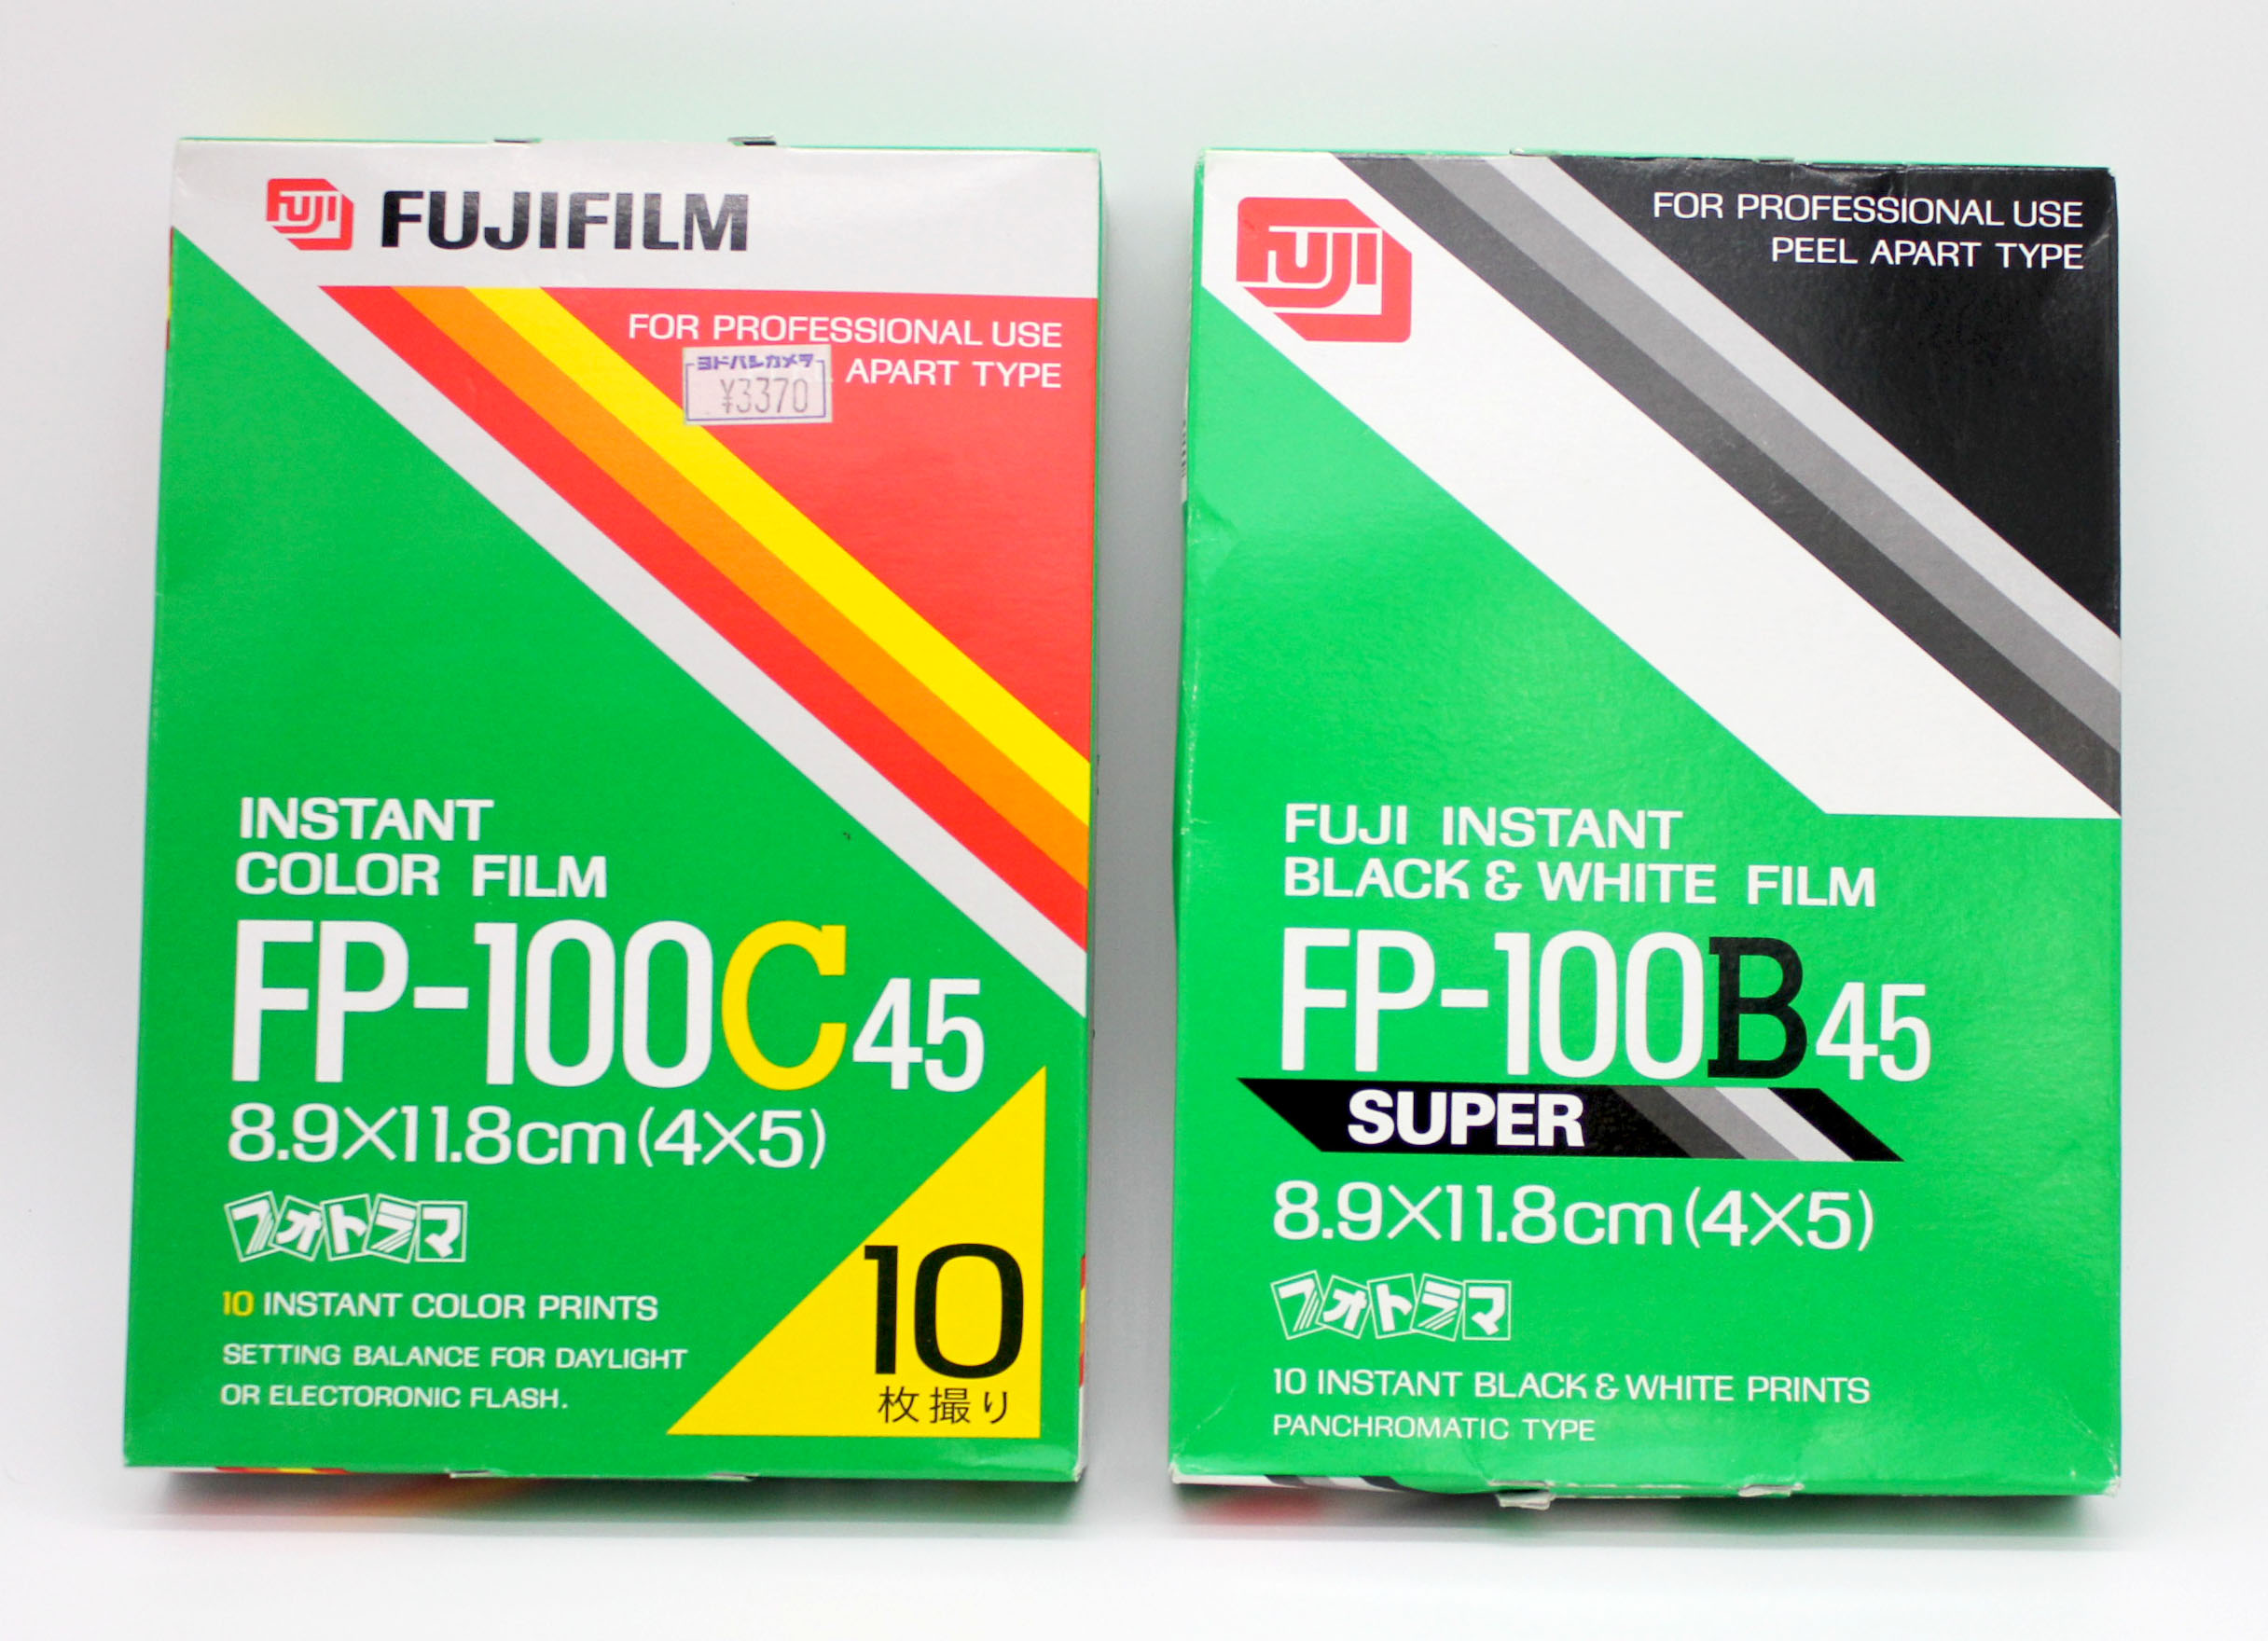 Japan Used Camera Shop | [New 2 Packs] Fuji Fujifilm FP-100C 45 Color & FP-100B 45 Black & White 4x5 Instant Film Pack Expired from Japan